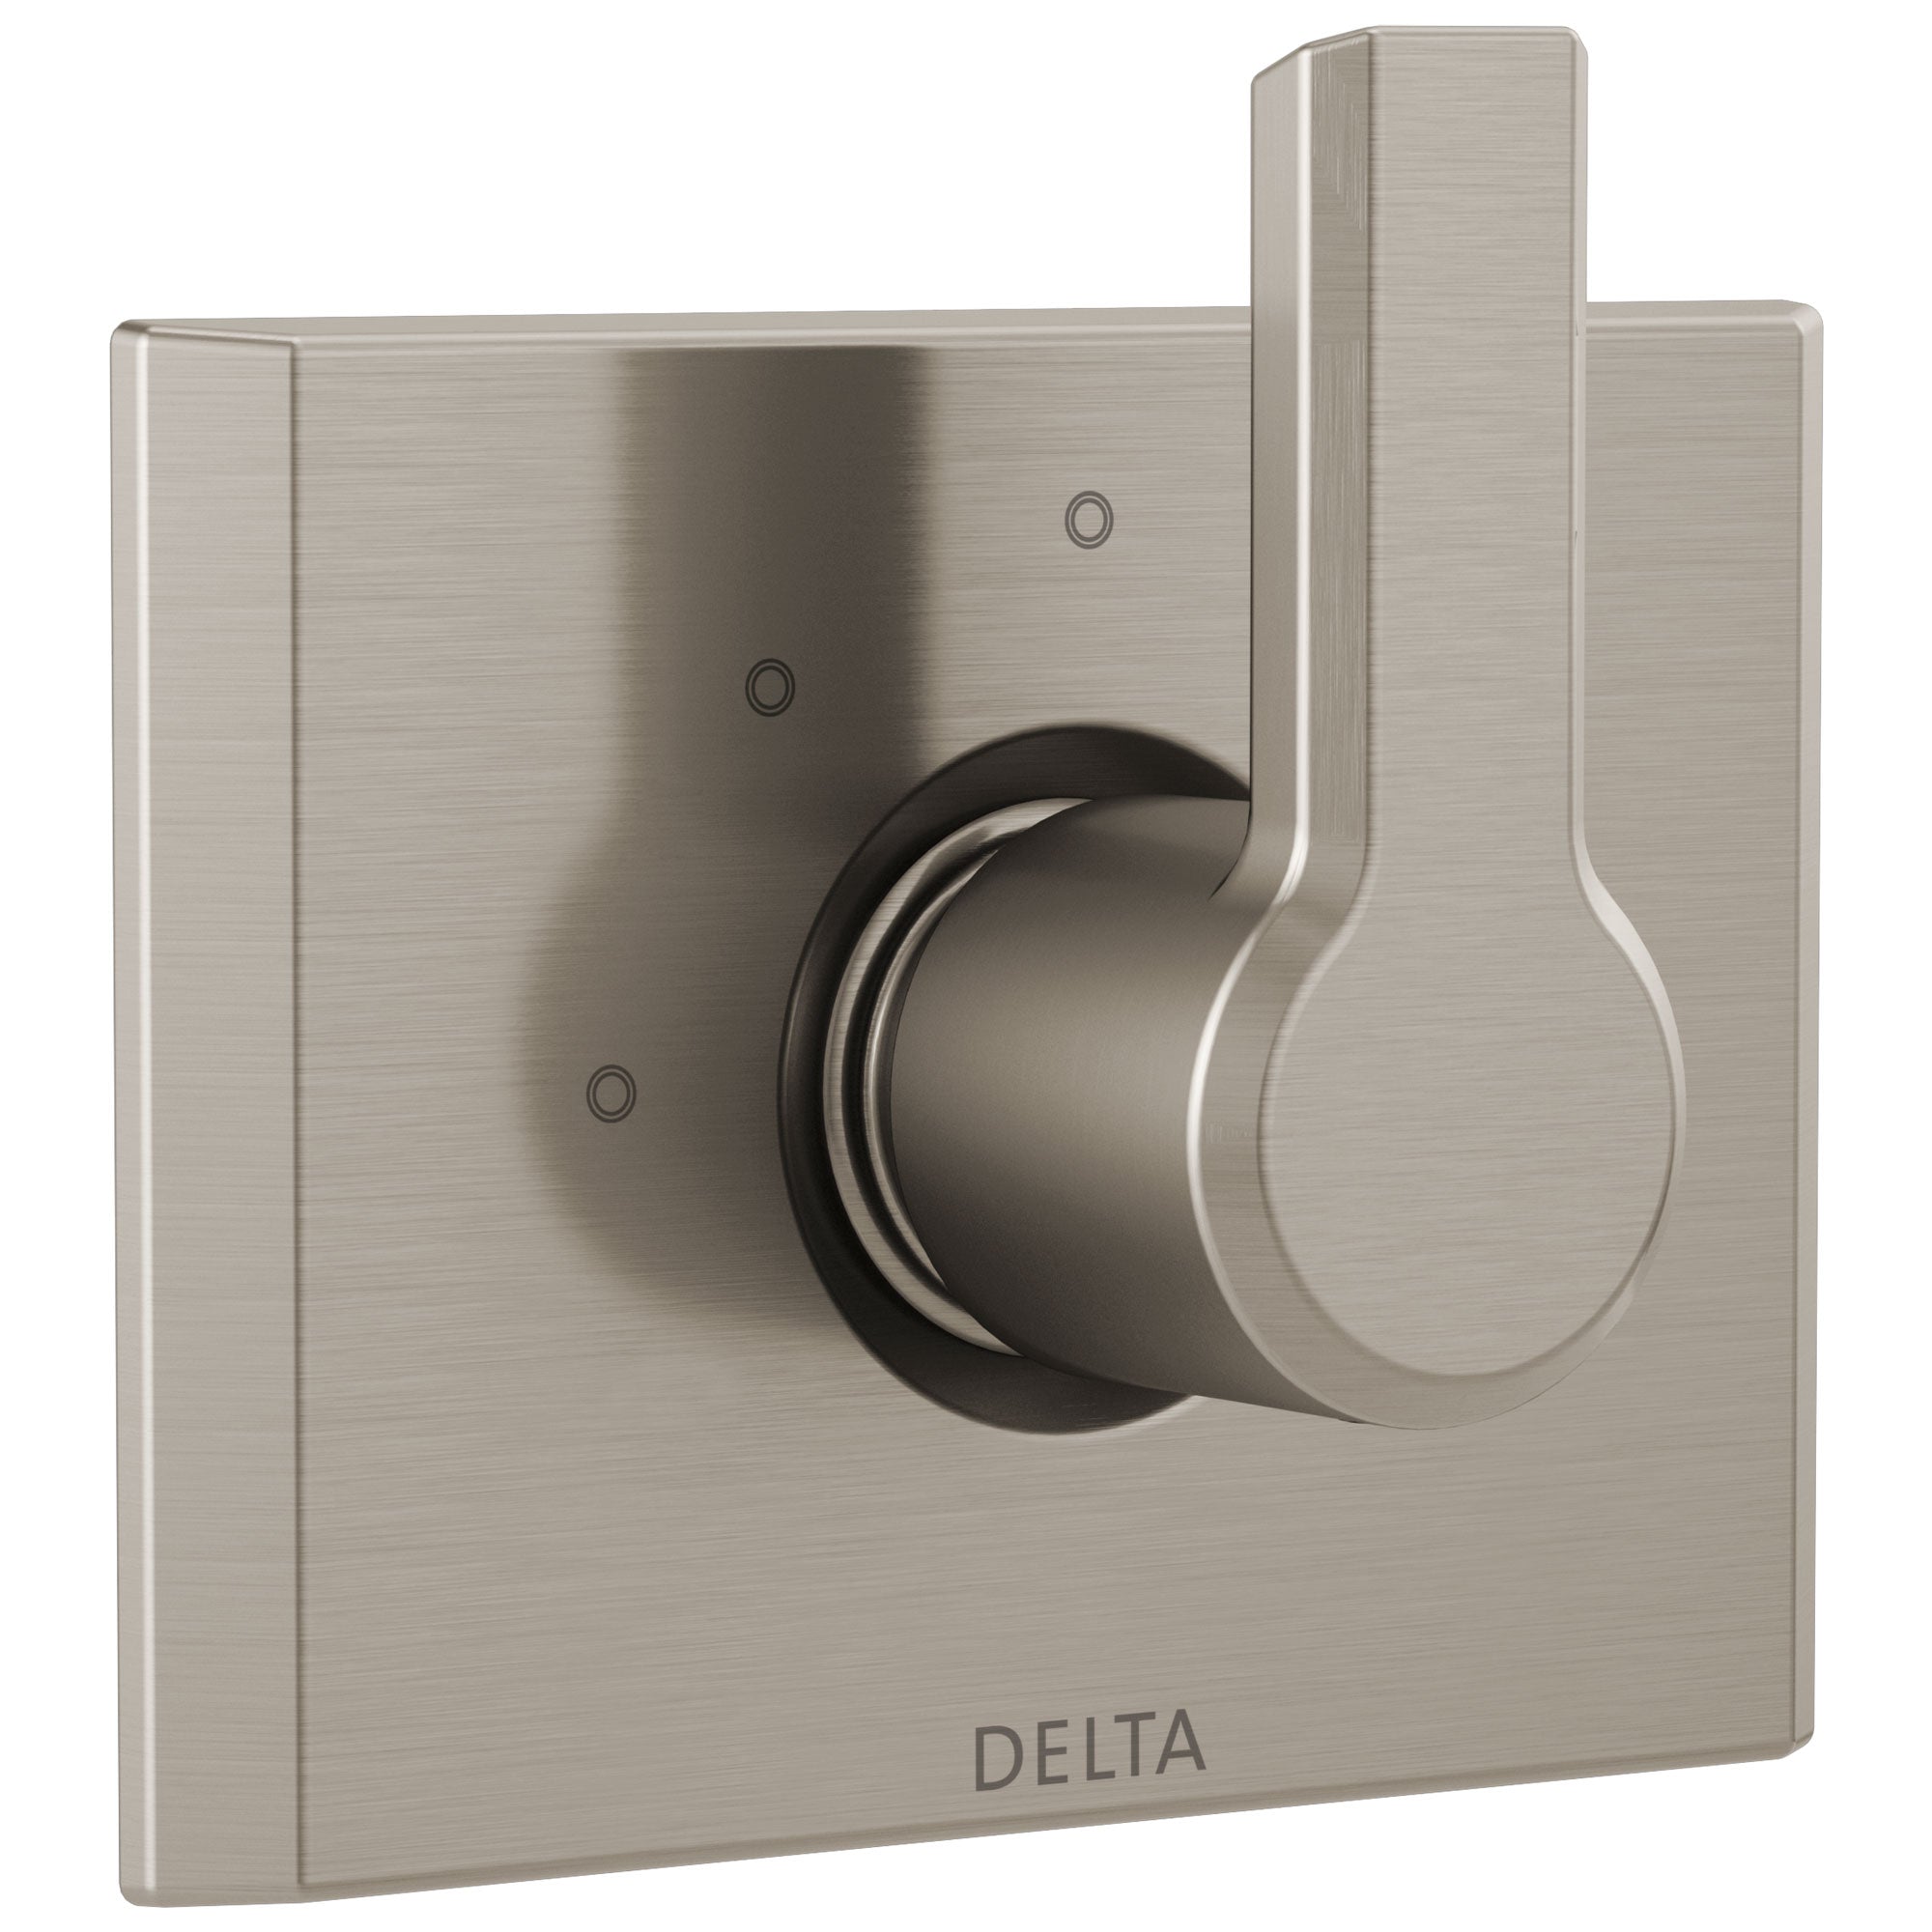 Delta Pivotal Modern Stainless Steel Finish 3-Setting 2 Outlet Port Shower System Diverter Includes Lever Handle and Rough-in Valve D3570V